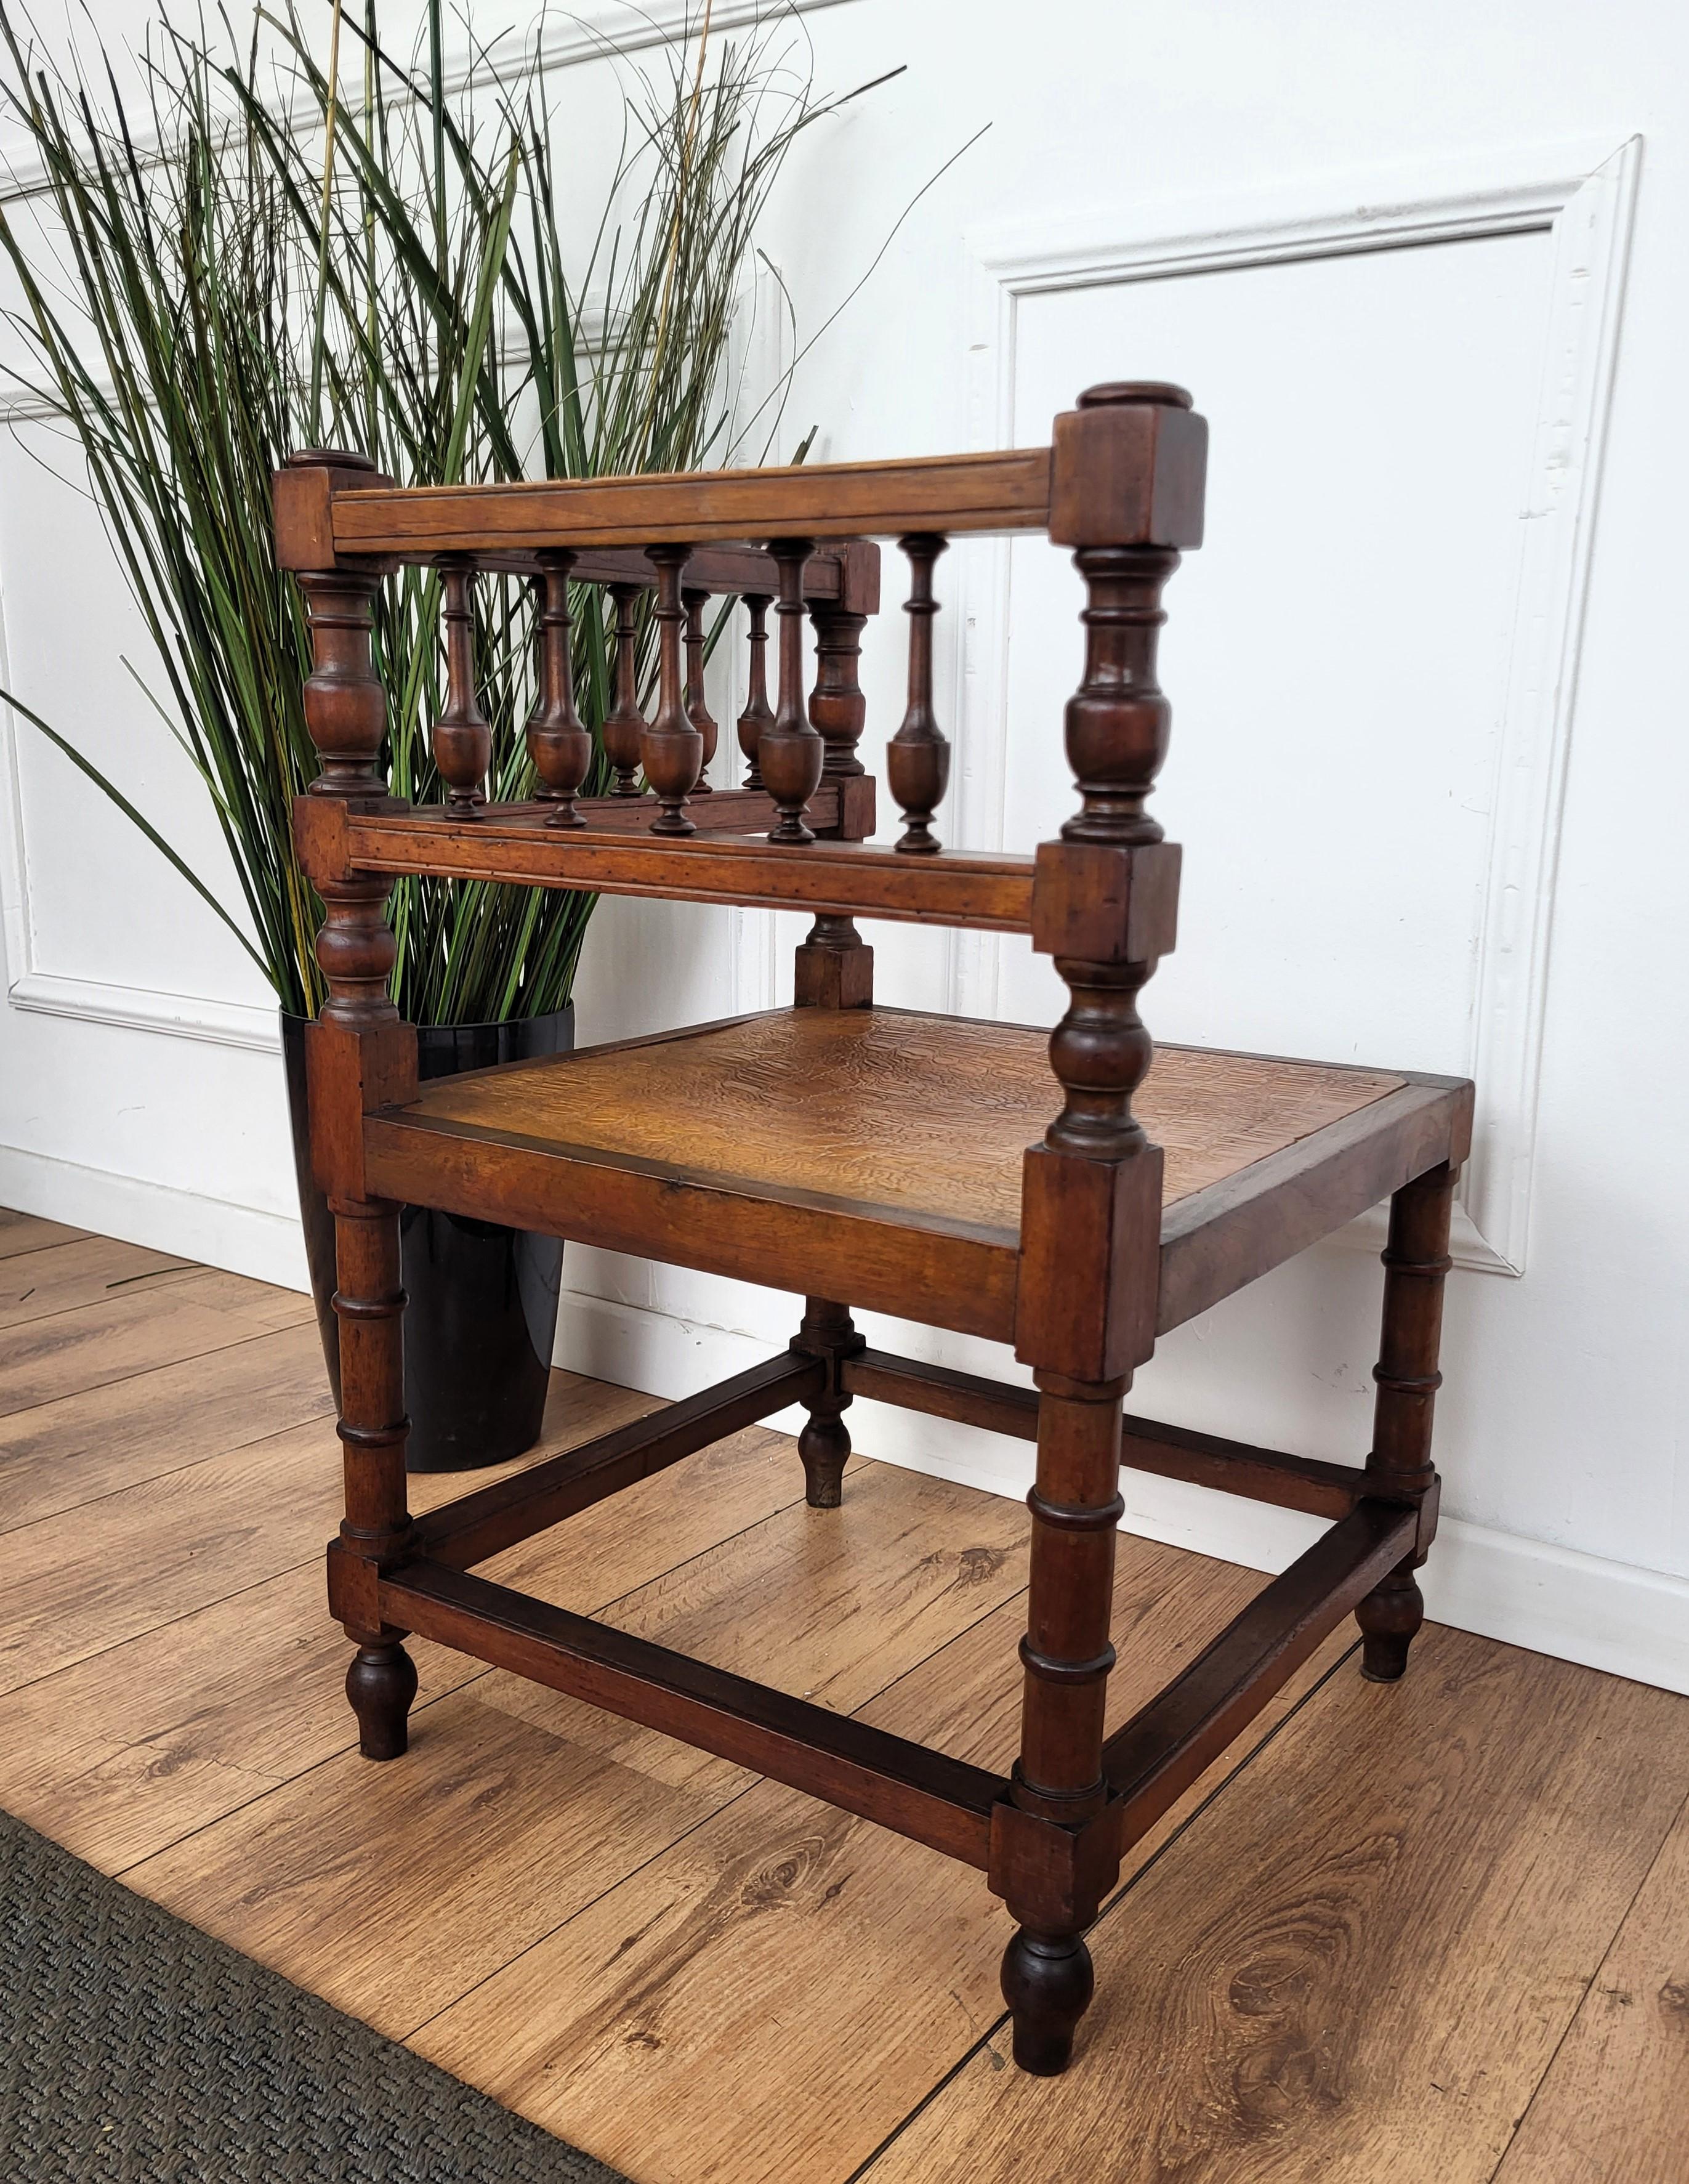 20th Century 1950s Italian Neoclassic Carved Wooden Corner Chair For Sale